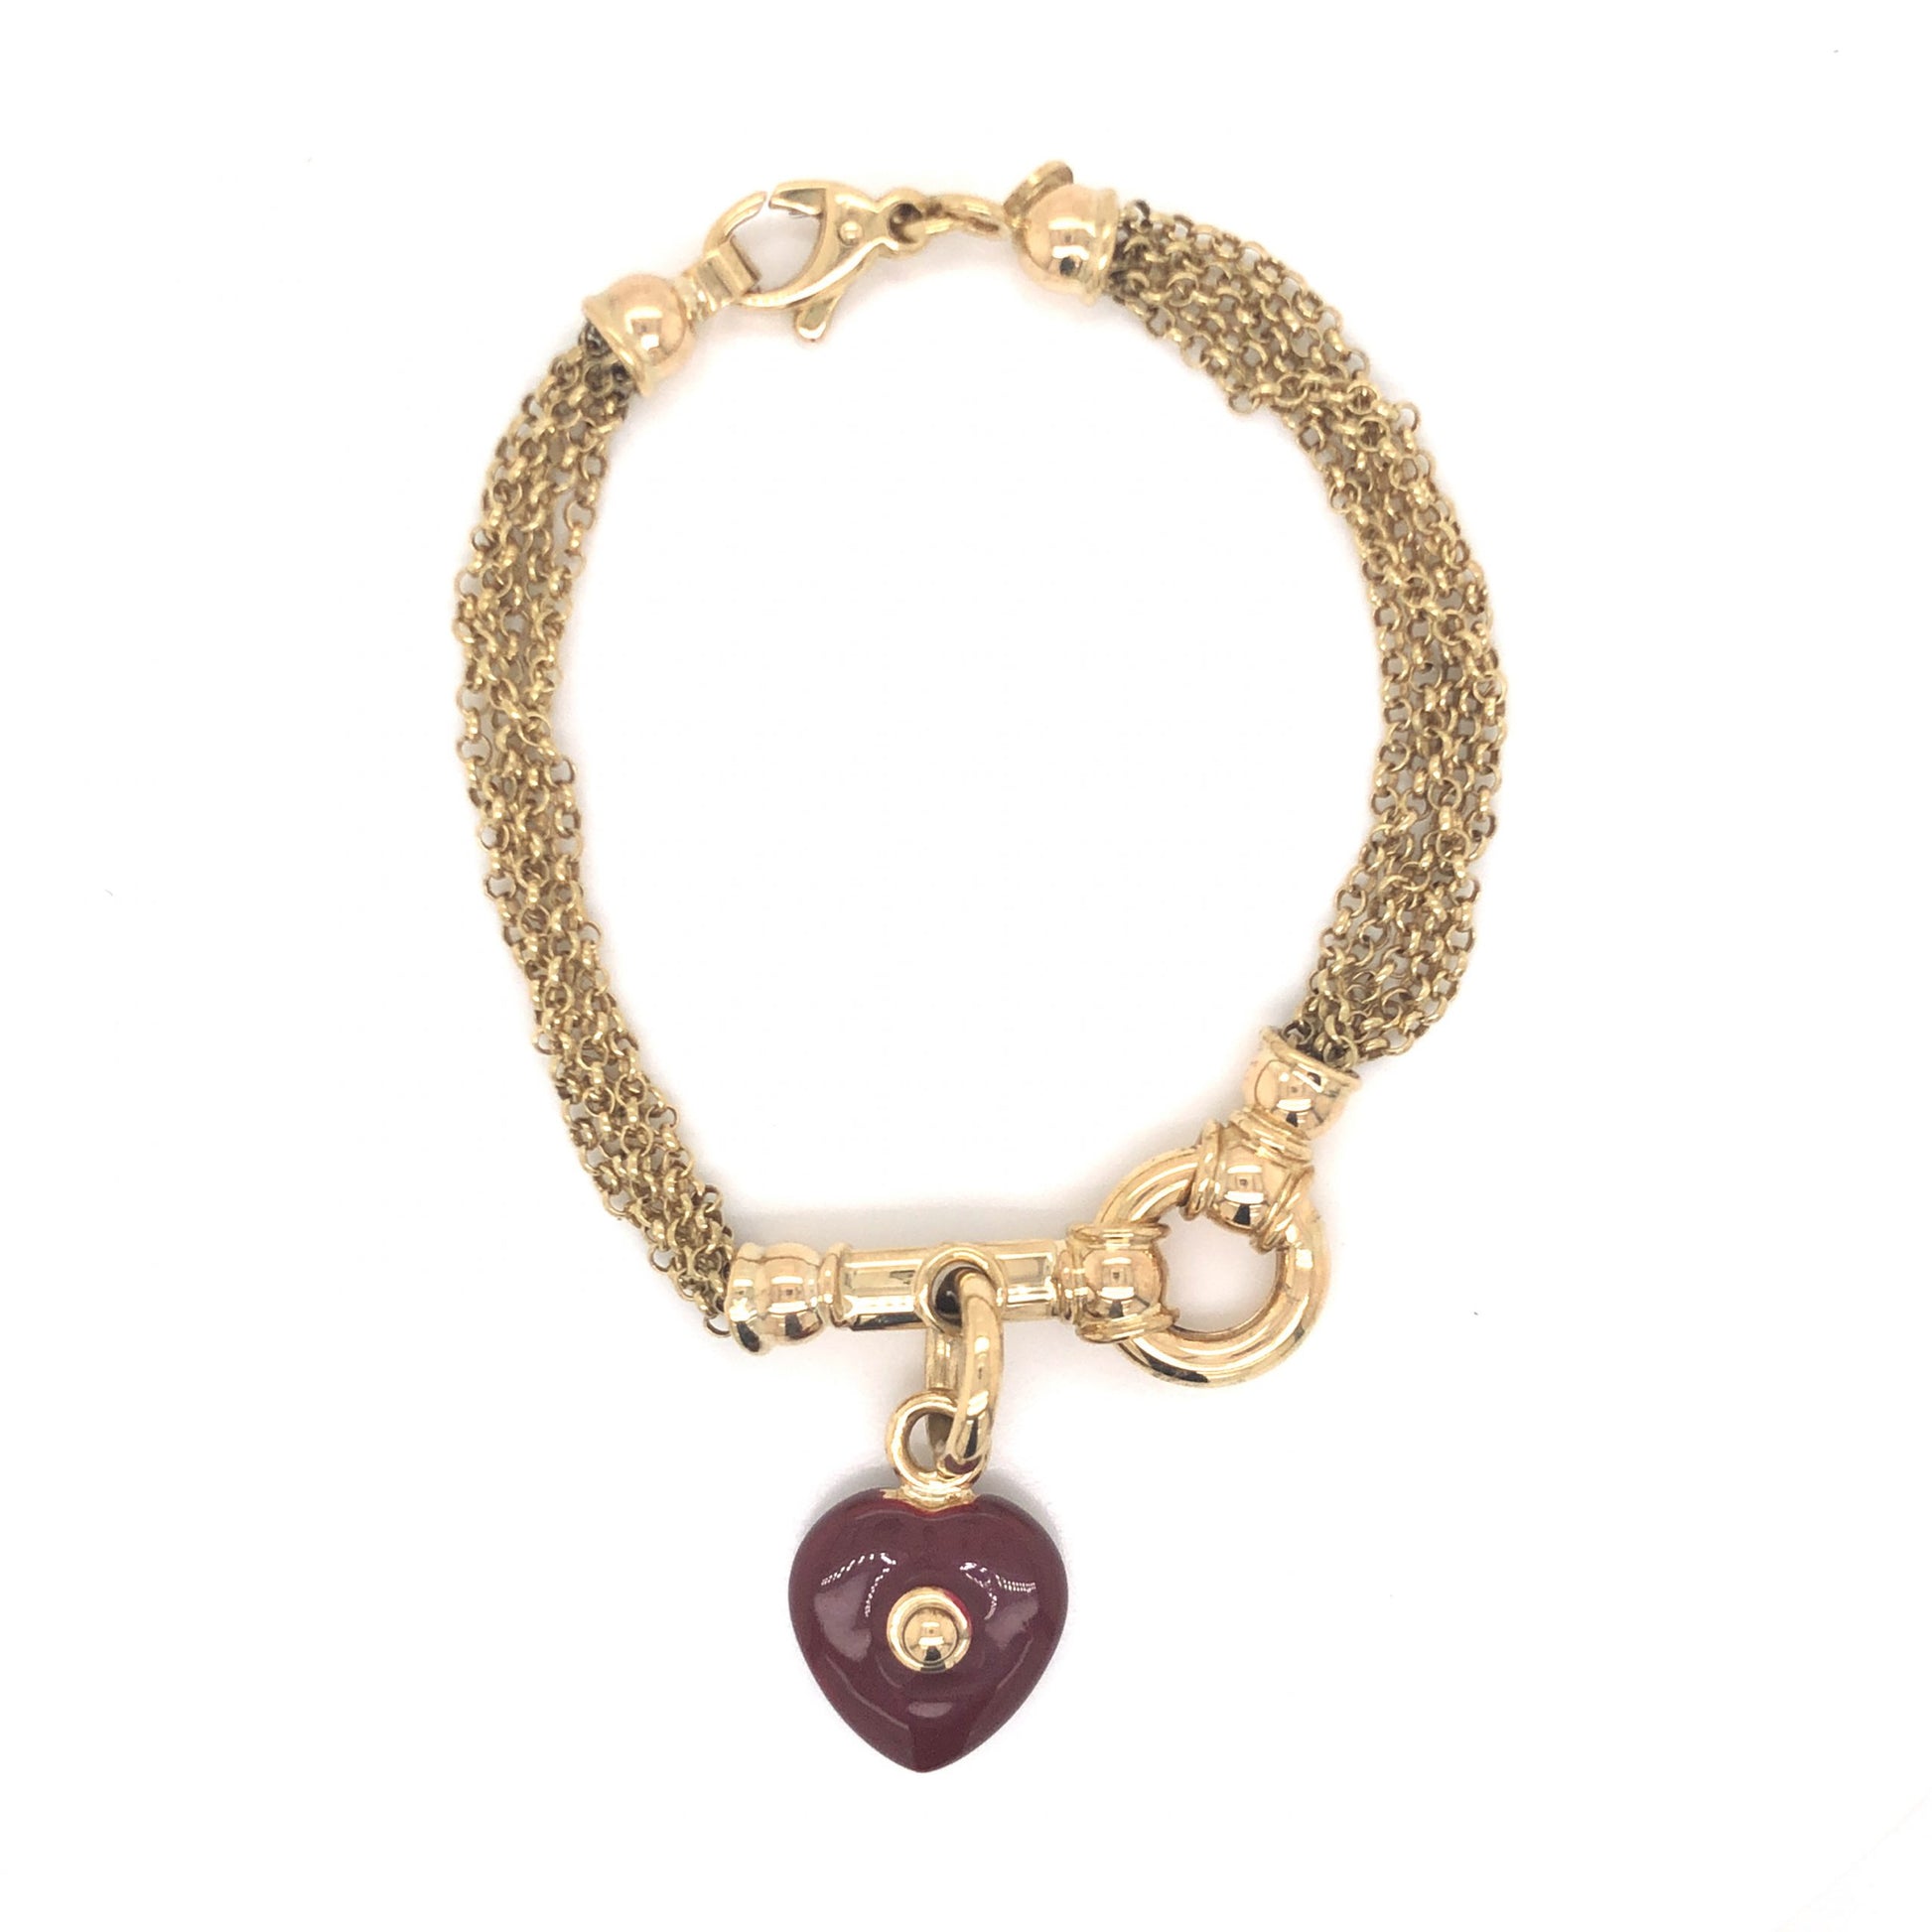 Heart Charm Multi-Chain Bracelet in 18k Yellow GoldComposition: 18 Karat Yellow GoldTotal Gram Weight: 16.8 gInscription: 18k Italy OWC